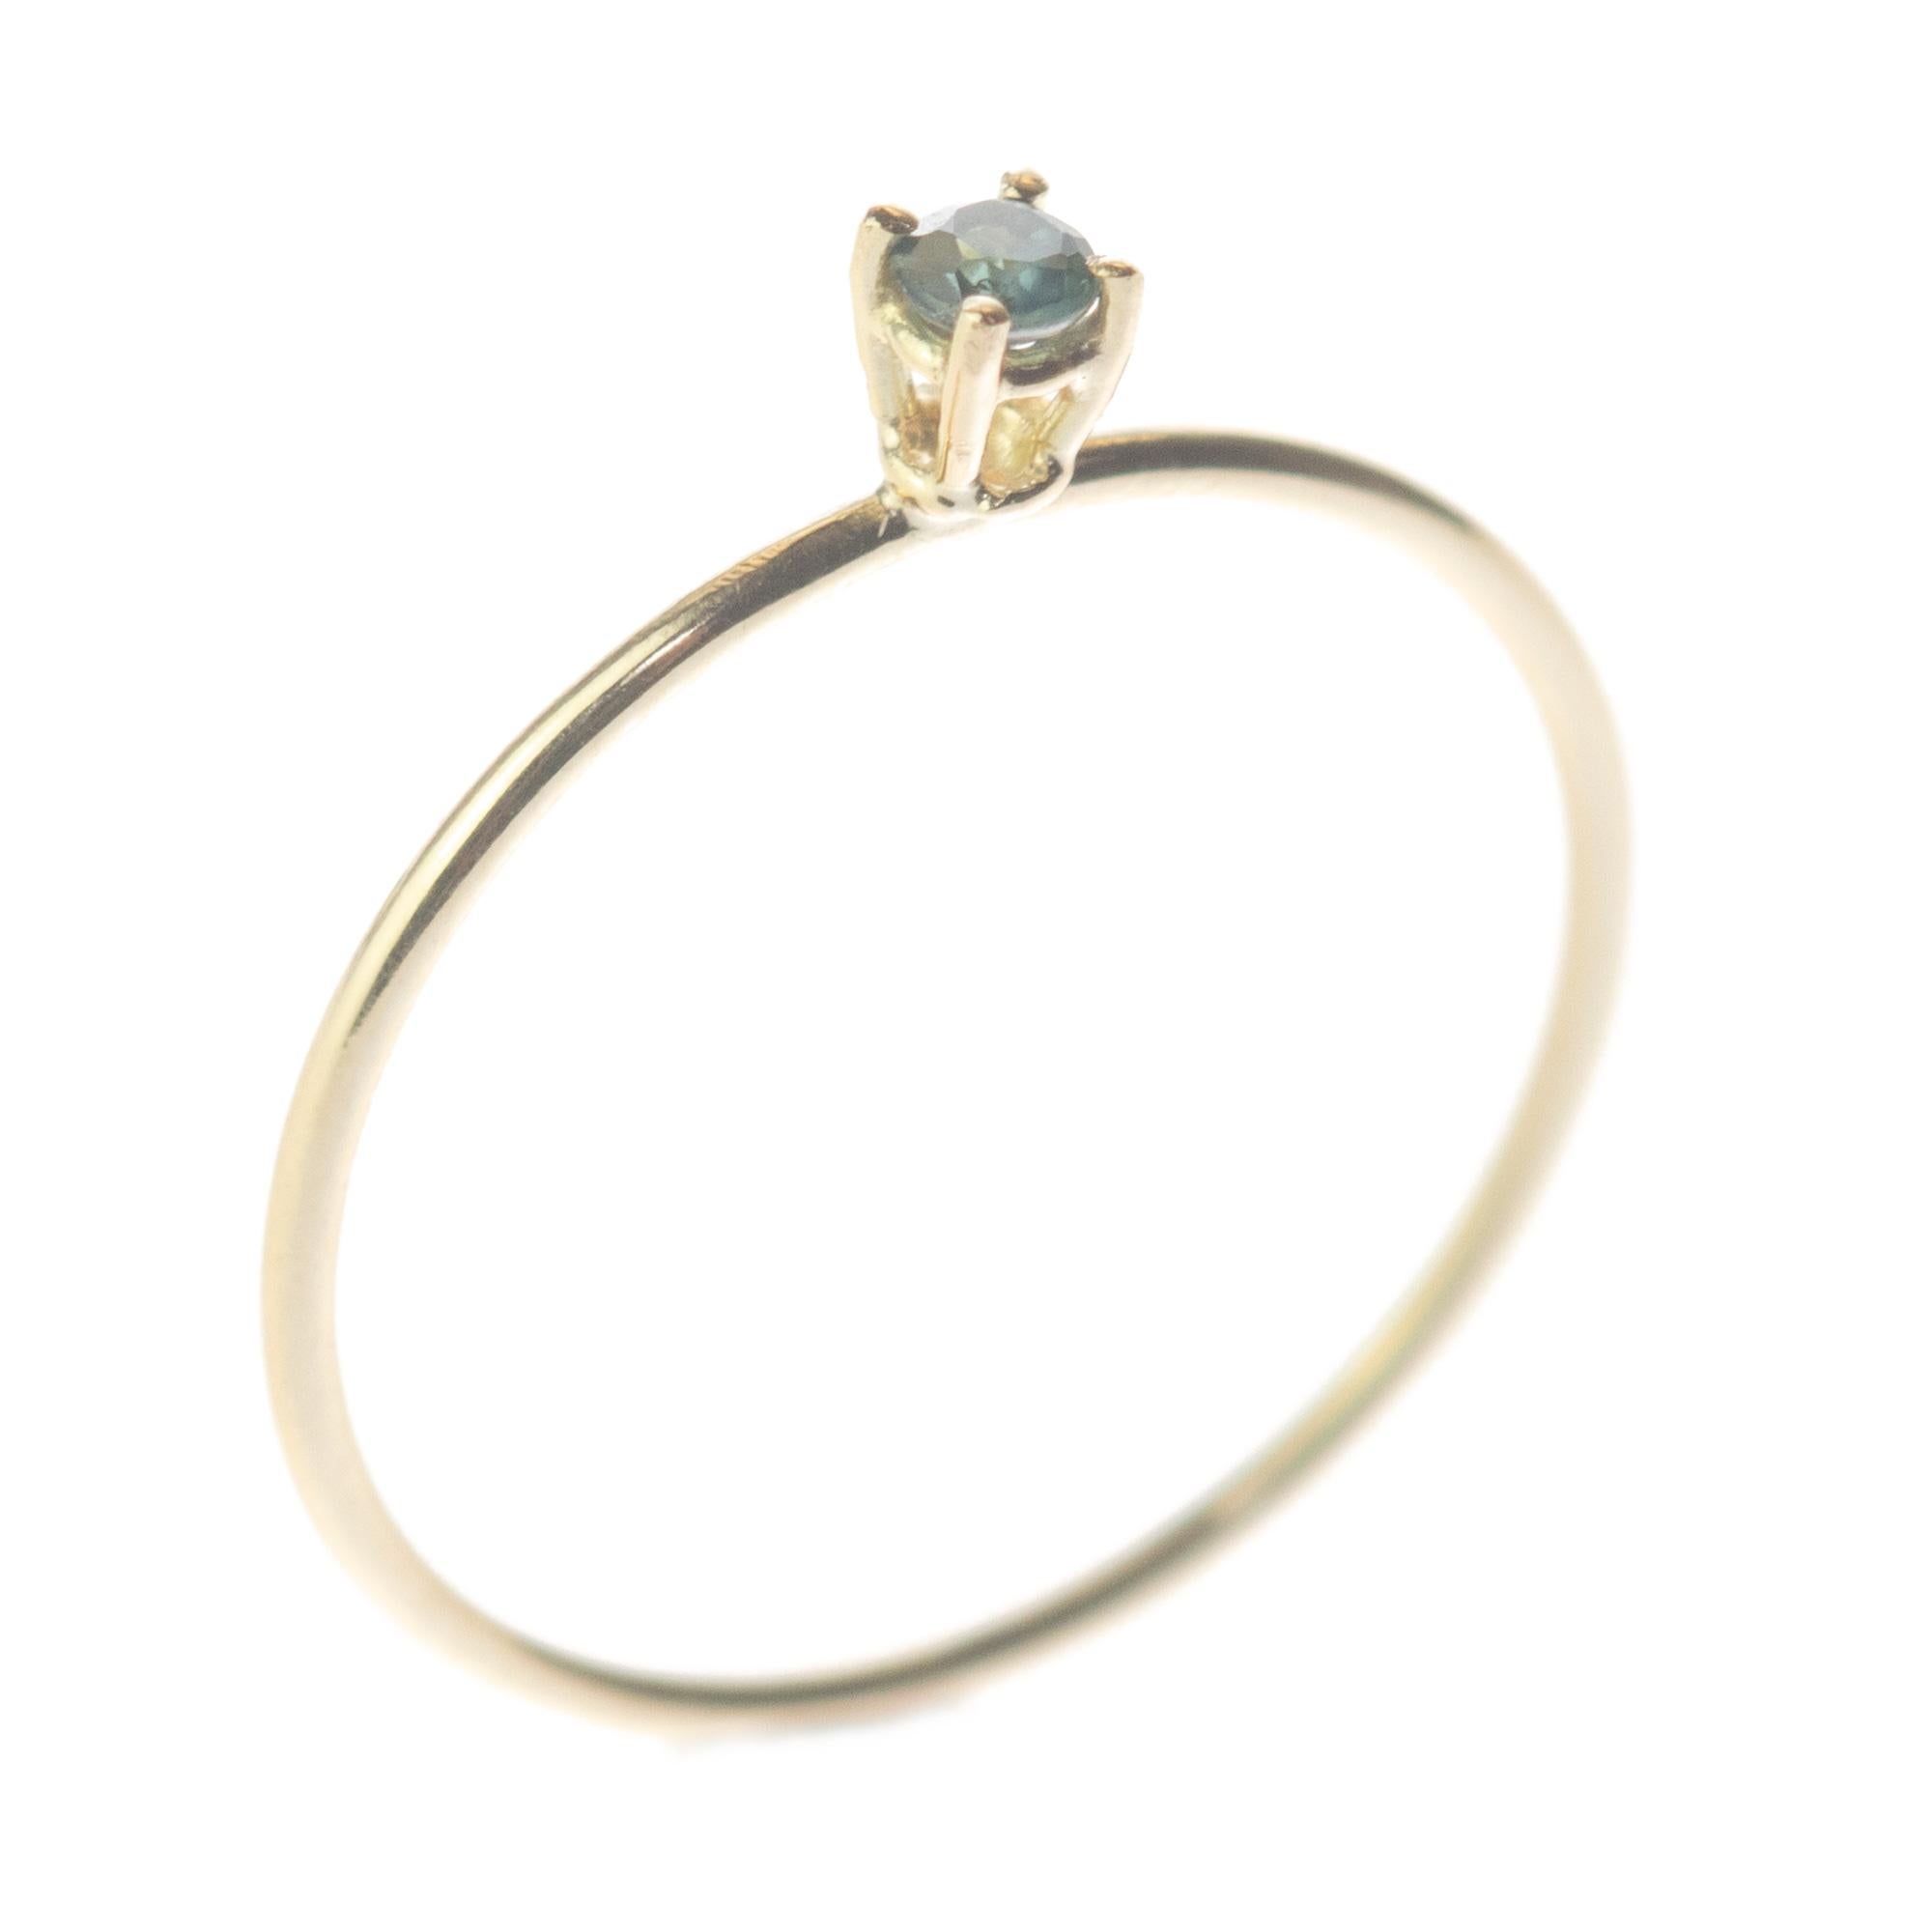 Signature INTINI Jewels blue sapphire jewellery. Modern and elegant ring design in 9k yellow gold with an brilliant cut with tiny griffes sormounting the ring.

Blue sapphires signified the height of celestial faith and hope in the ancient and